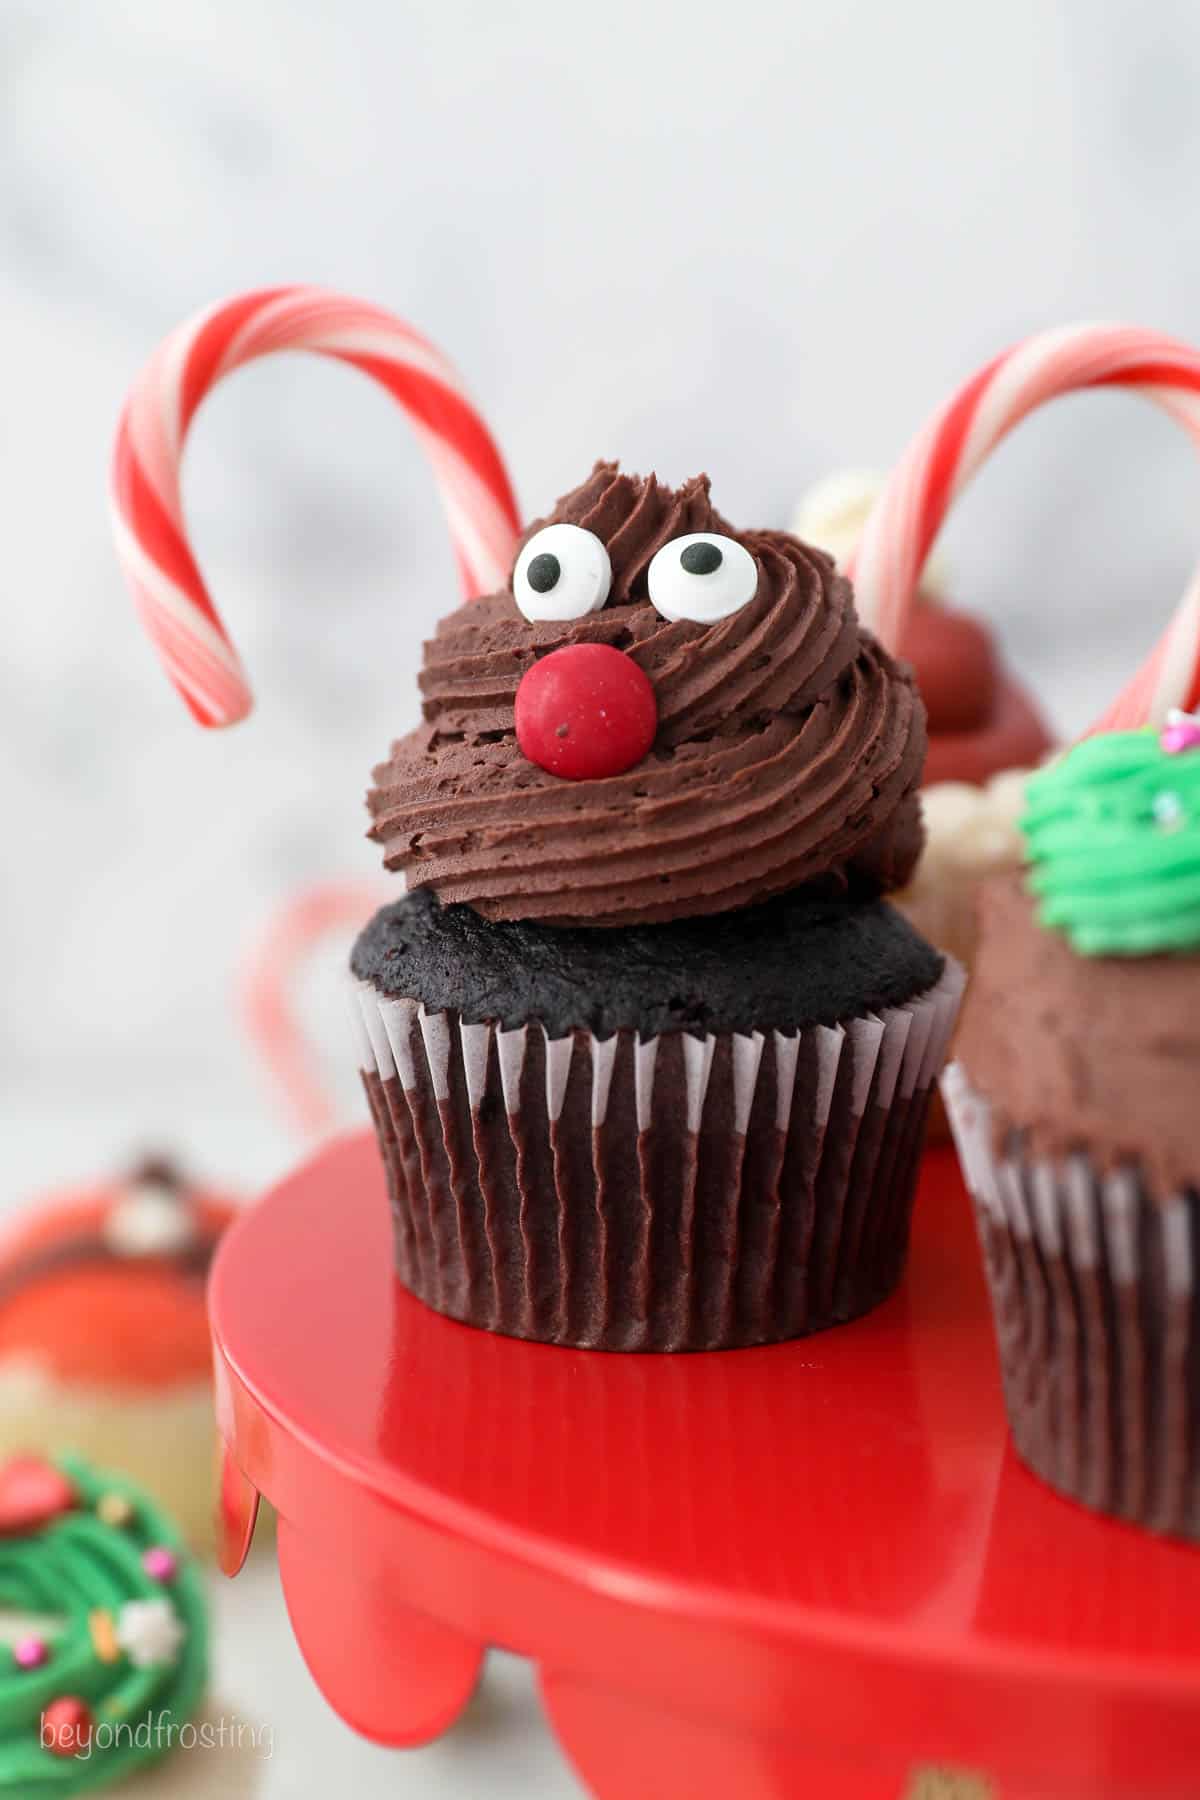 A chocolate cupcake decorated to look like a reindeer.